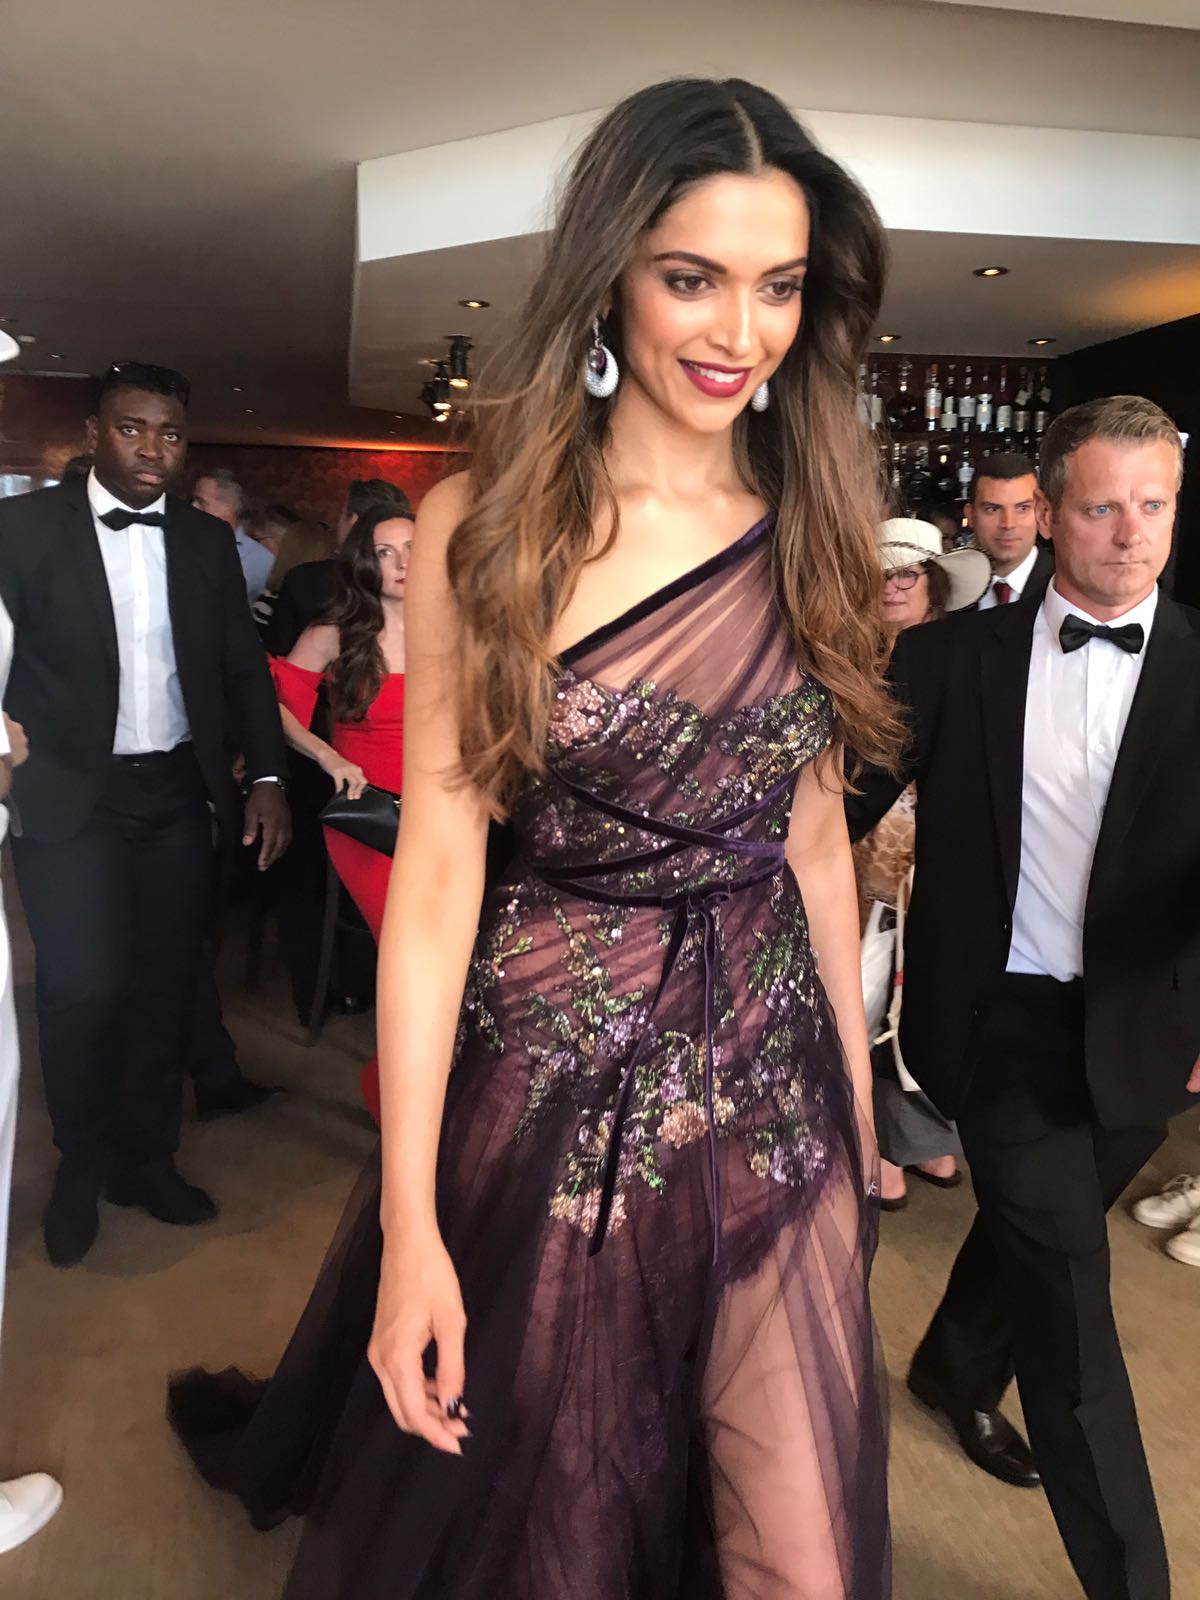 Deepika Padukone Looks Stunning in a Sheer Marchesa Gown At The Opening Ceremony Of 70th Cannes Film Festival 2017